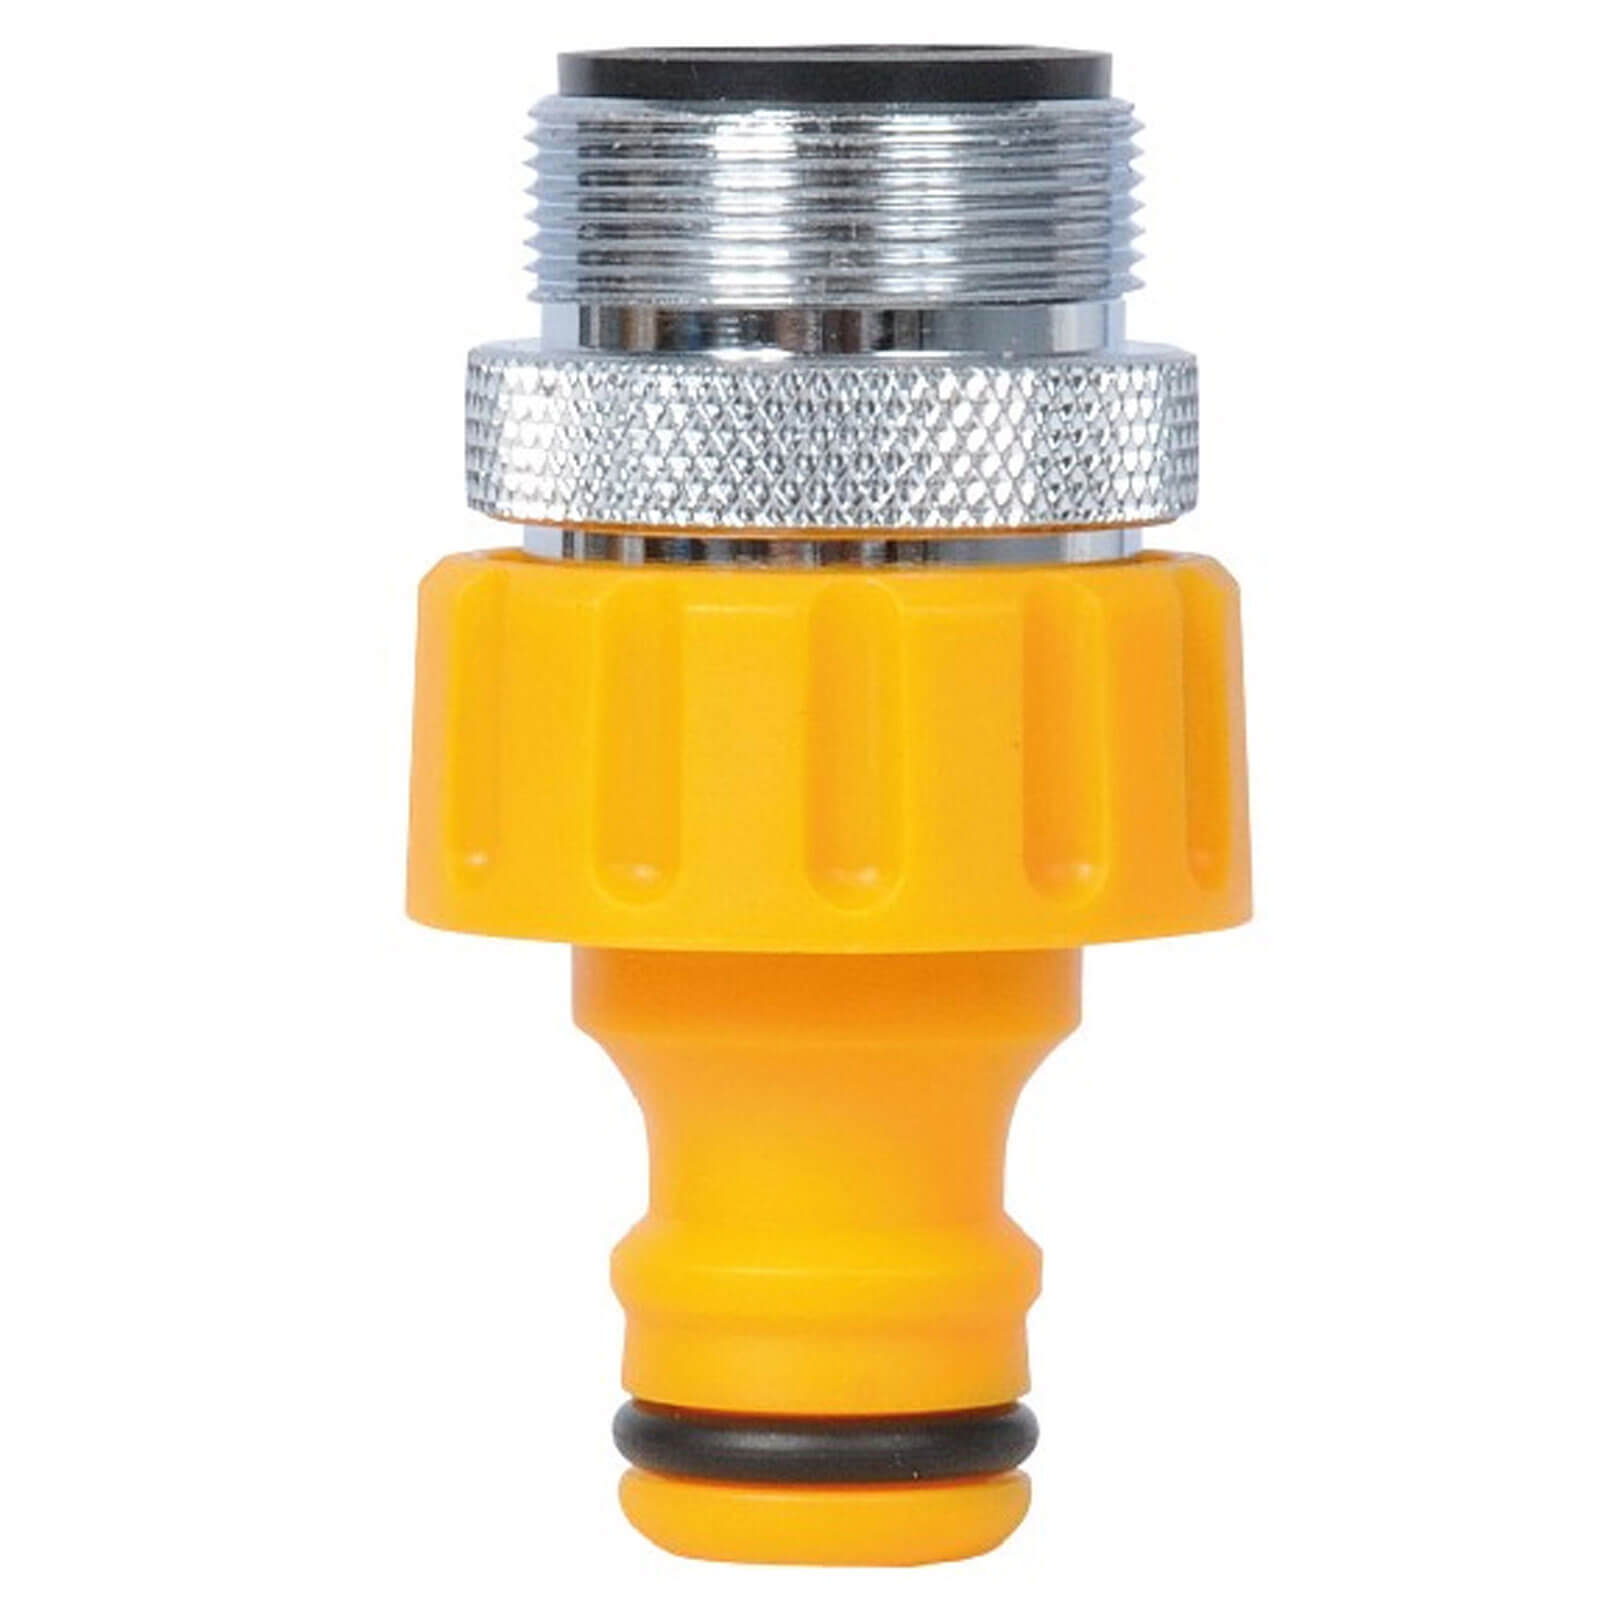 Hozelock Aerator Head M24 Male Threaded Tap Hose Pipe Connector 24mm